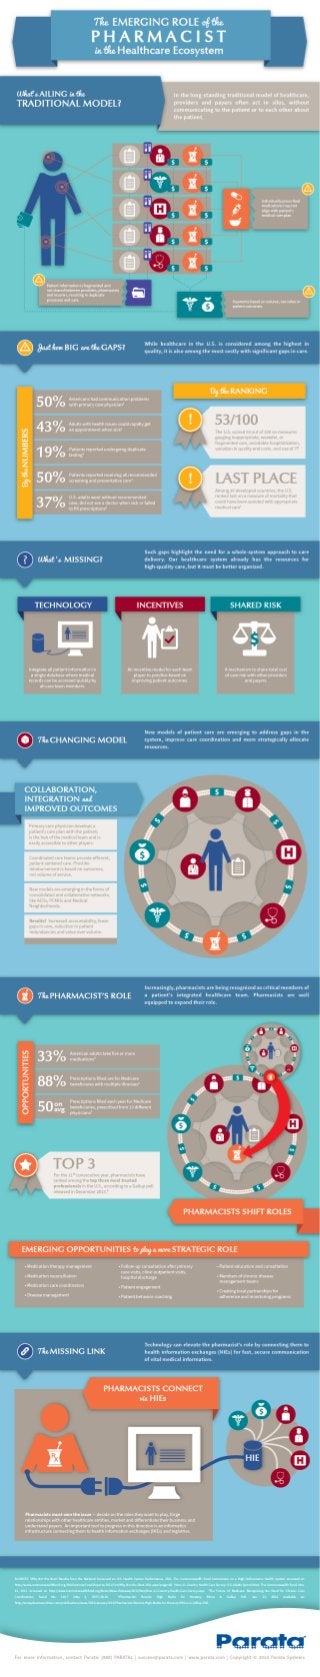 Infographic: The Emerging Role of the Pharmacist in the Healthcare Ecosystem